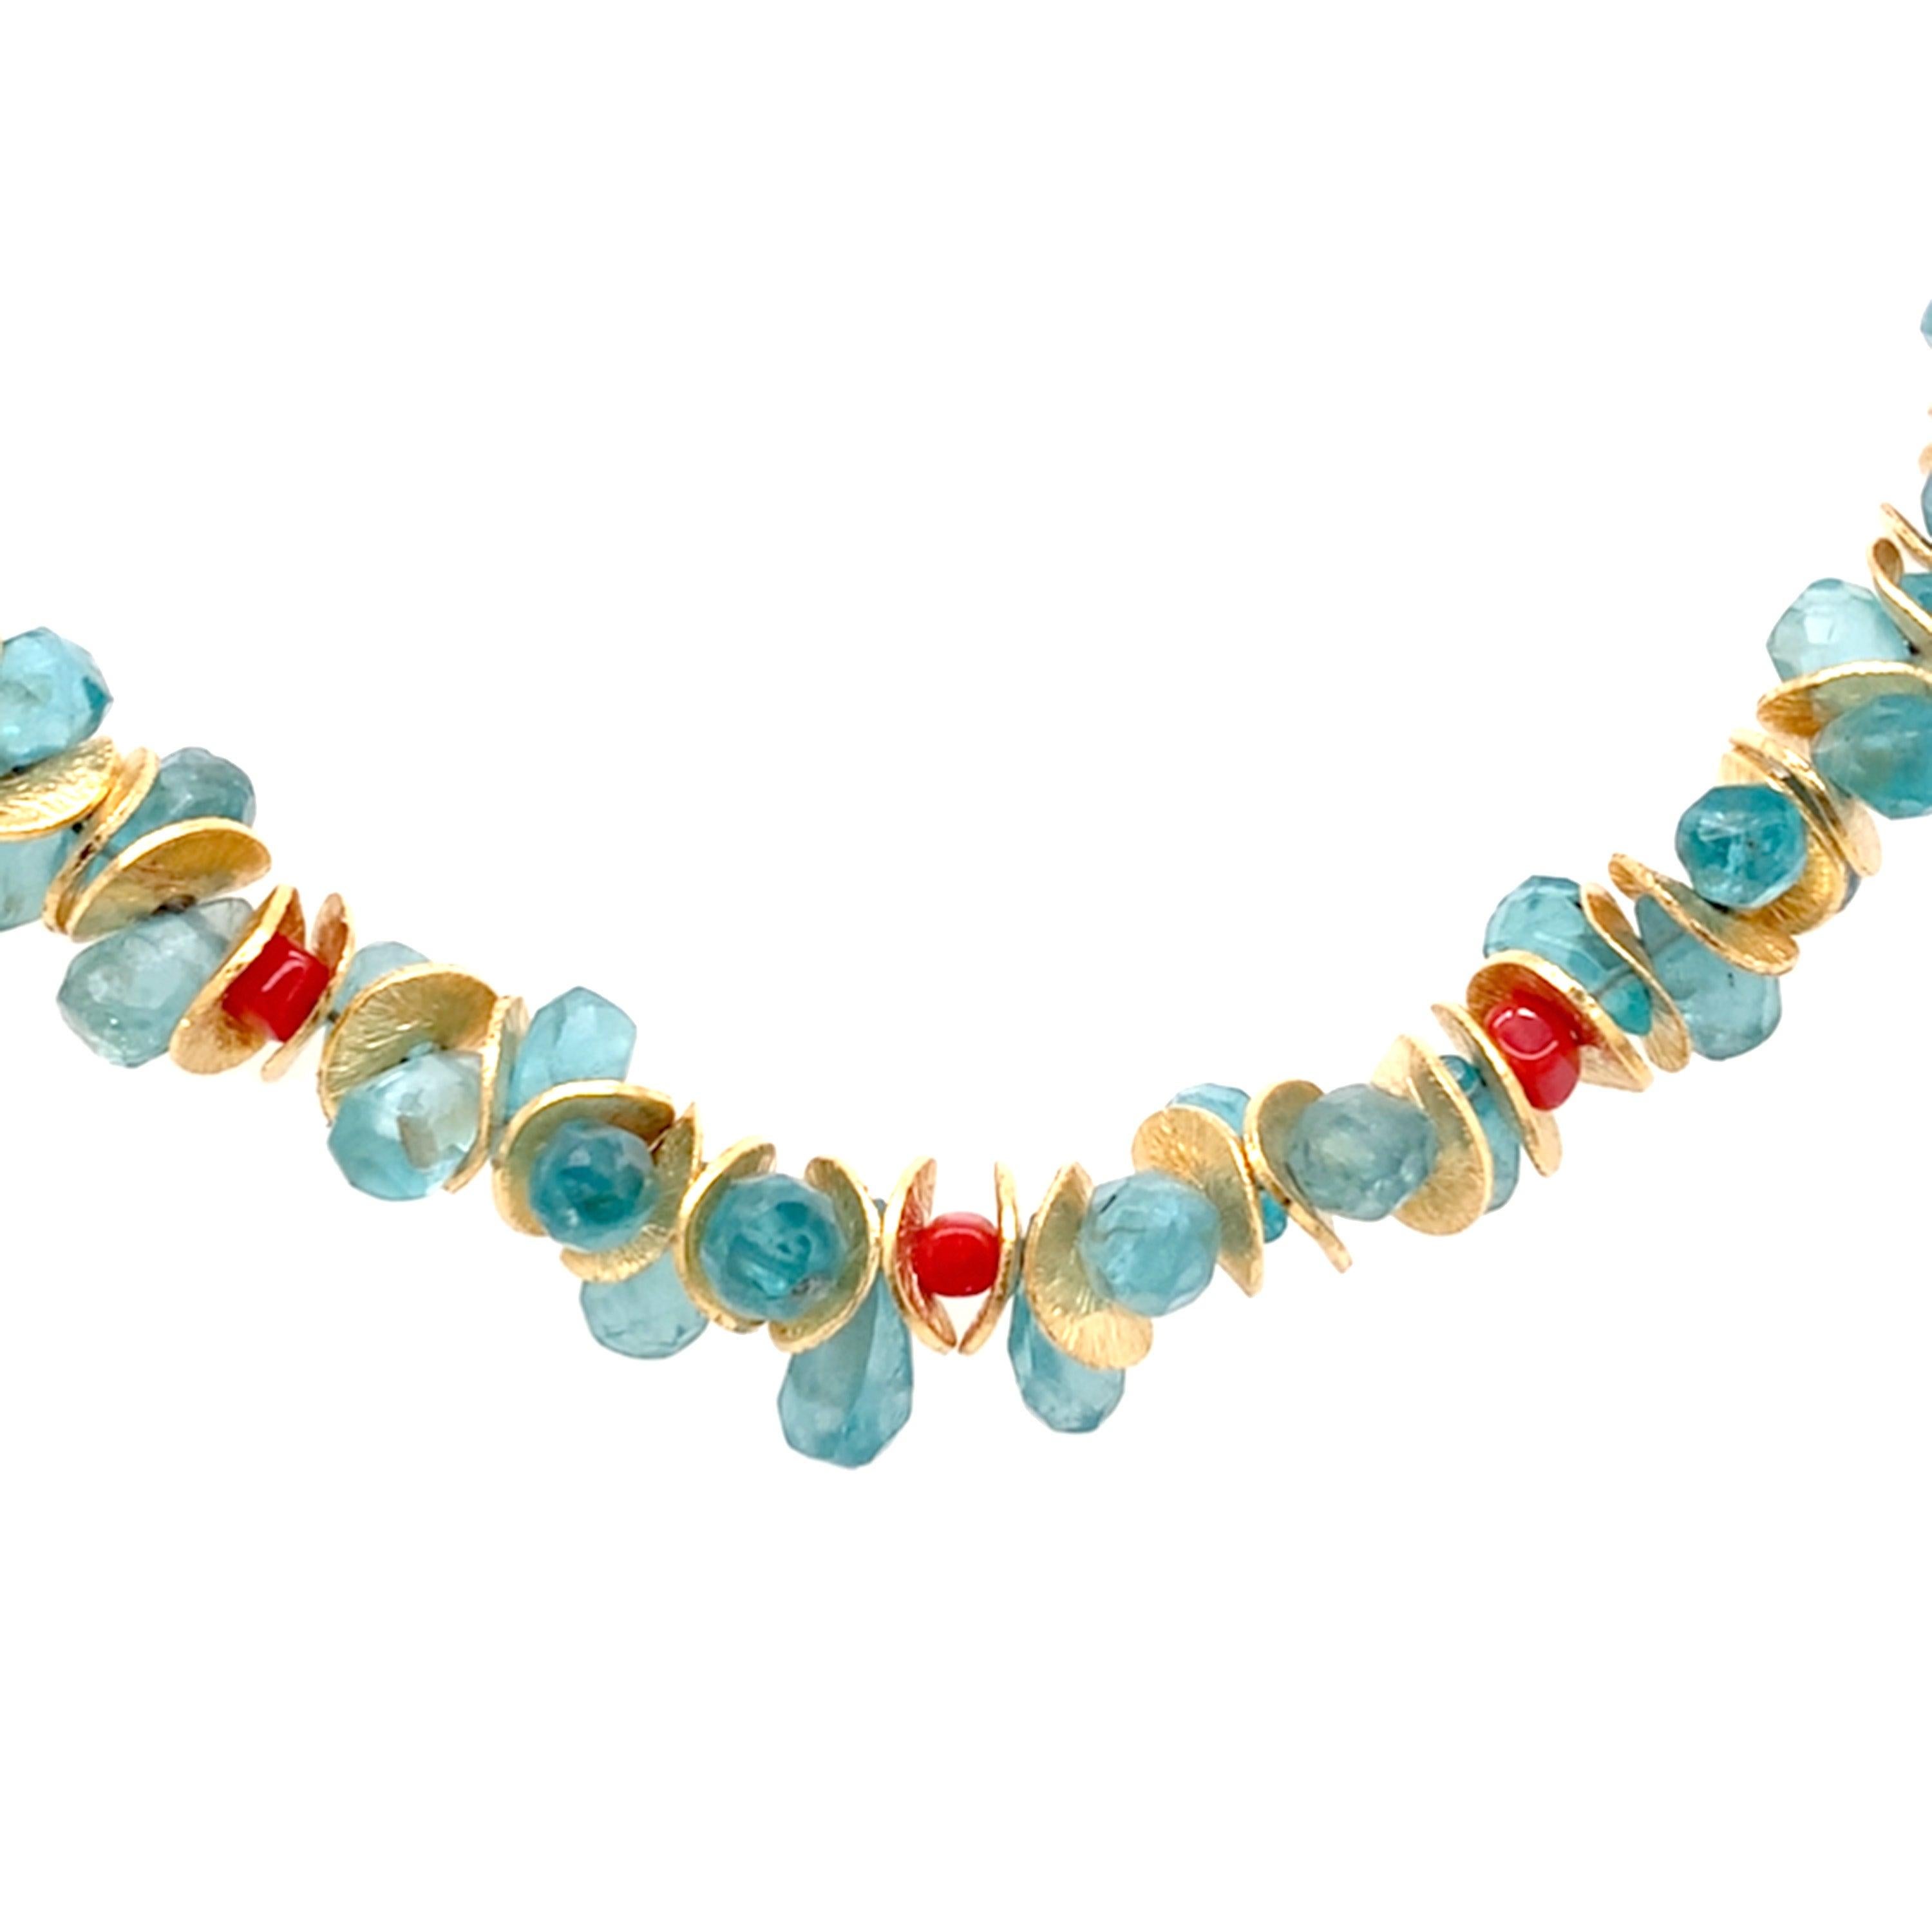 My signature bracelet using aqua apatite briolettes with spots of smooth coral beads.  There are also 22K gold vermeil details finished with a 14K gold filled spring ring clasp.

This item is made to order, the one pictured is 7.25